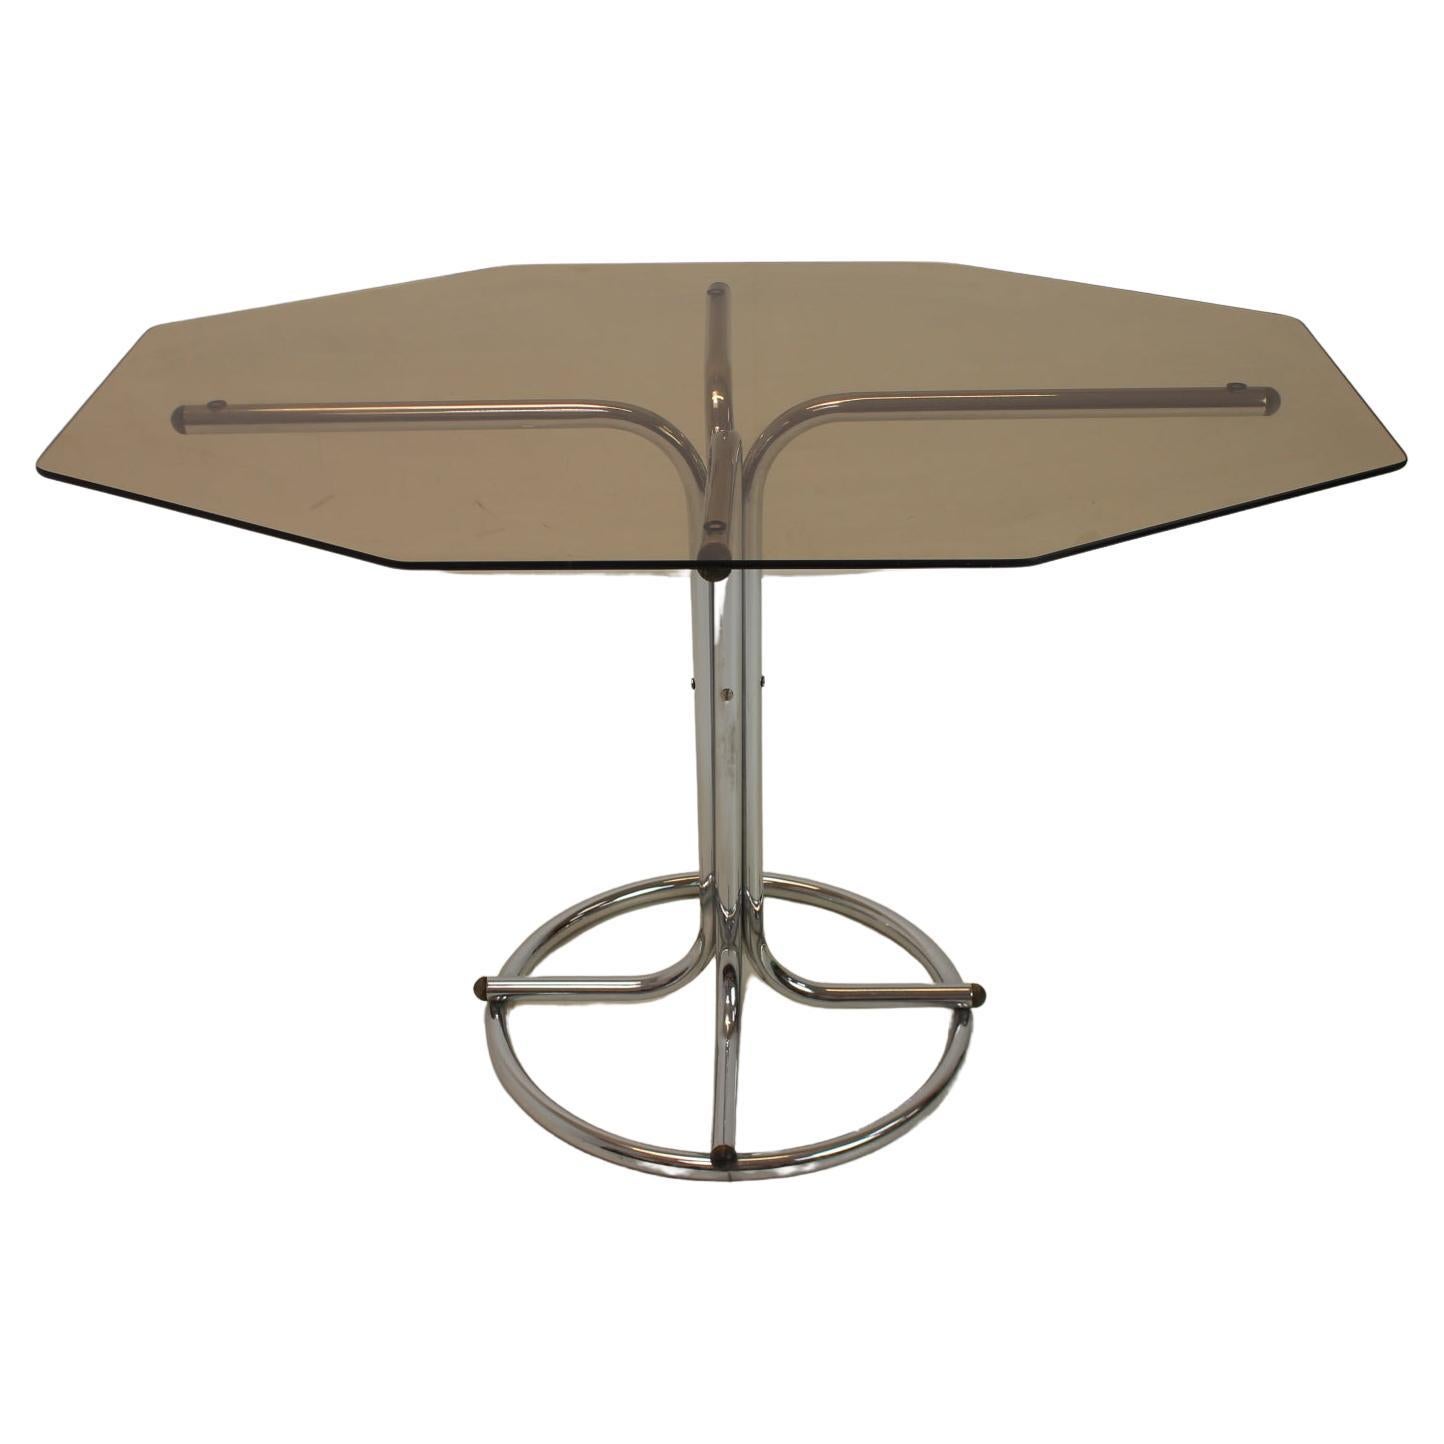 Midcentury Chrome and Glass Dining Table, Czechoslovakia, 1970s For Sale